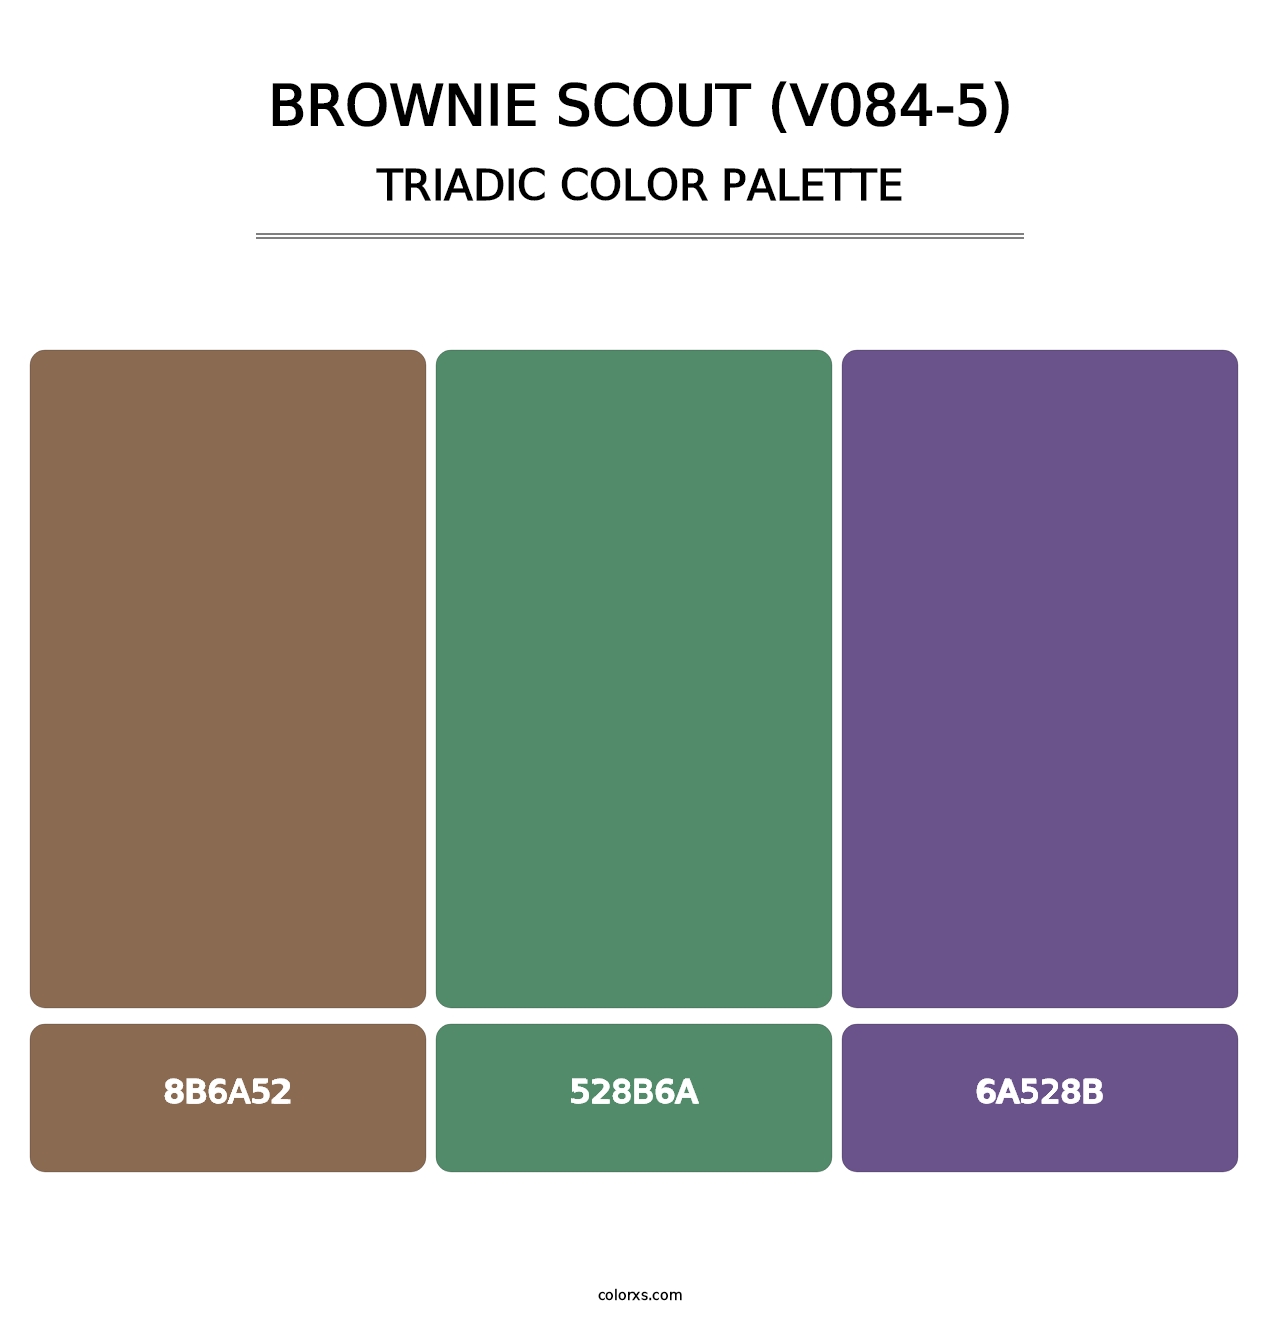 Brownie Scout (V084-5) - Triadic Color Palette